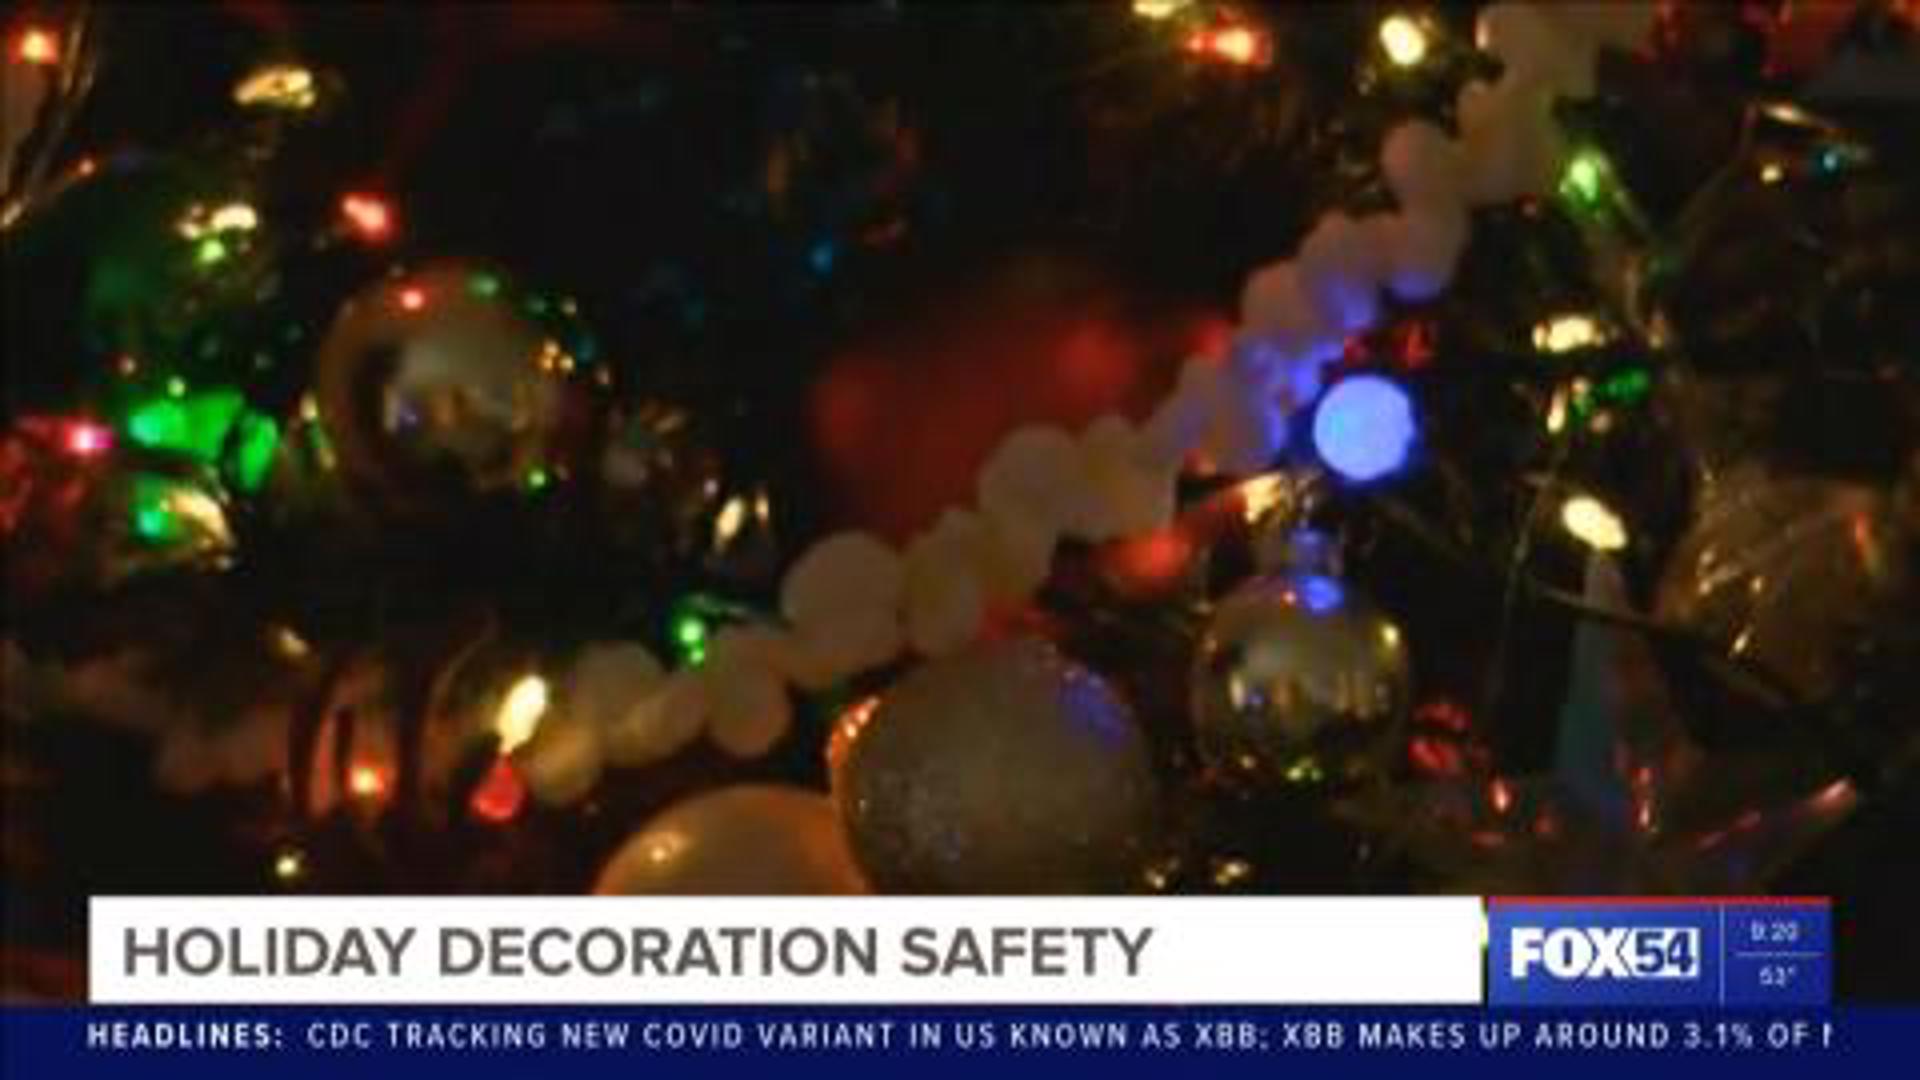 Putting up your holiday tree, decorations, and lights? Safety matters! Keep your holiday from becoming a tragedy.